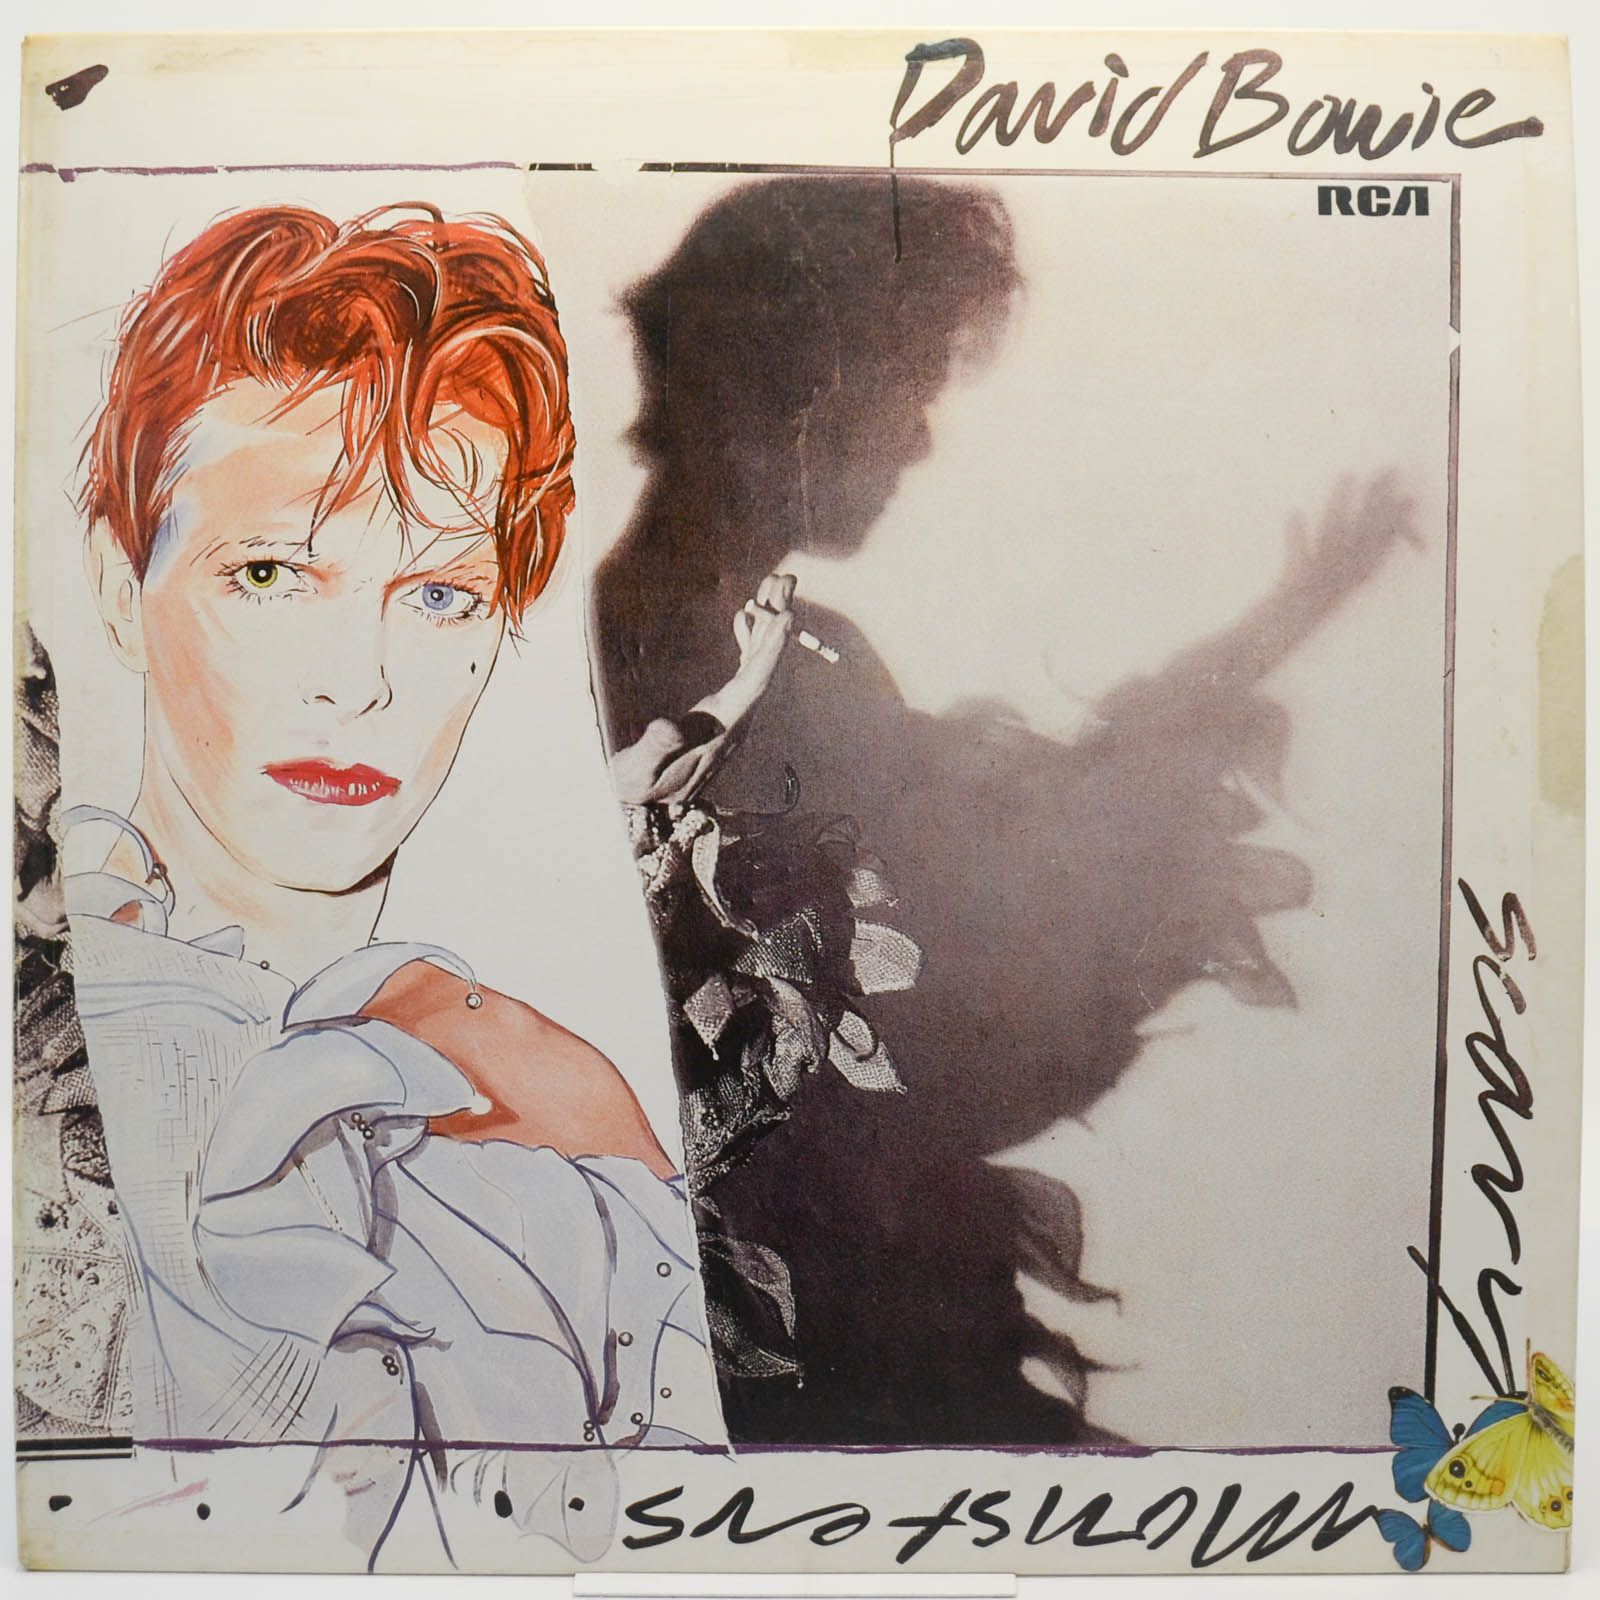 David Bowie — Scary Monsters, 1980